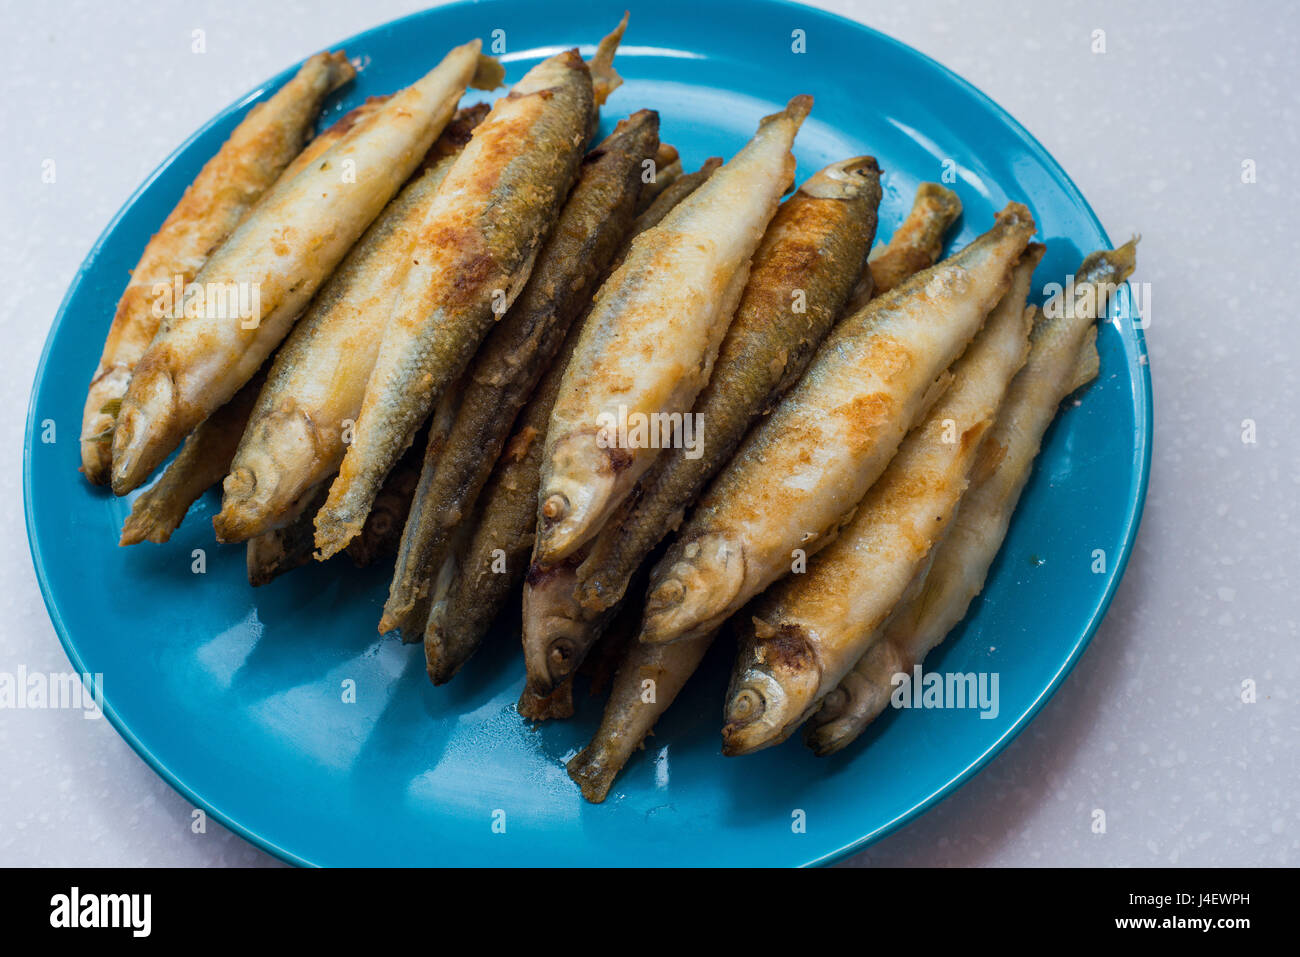 Fried smelts fish lays on a white plate over gray tablecloth Stock Photo